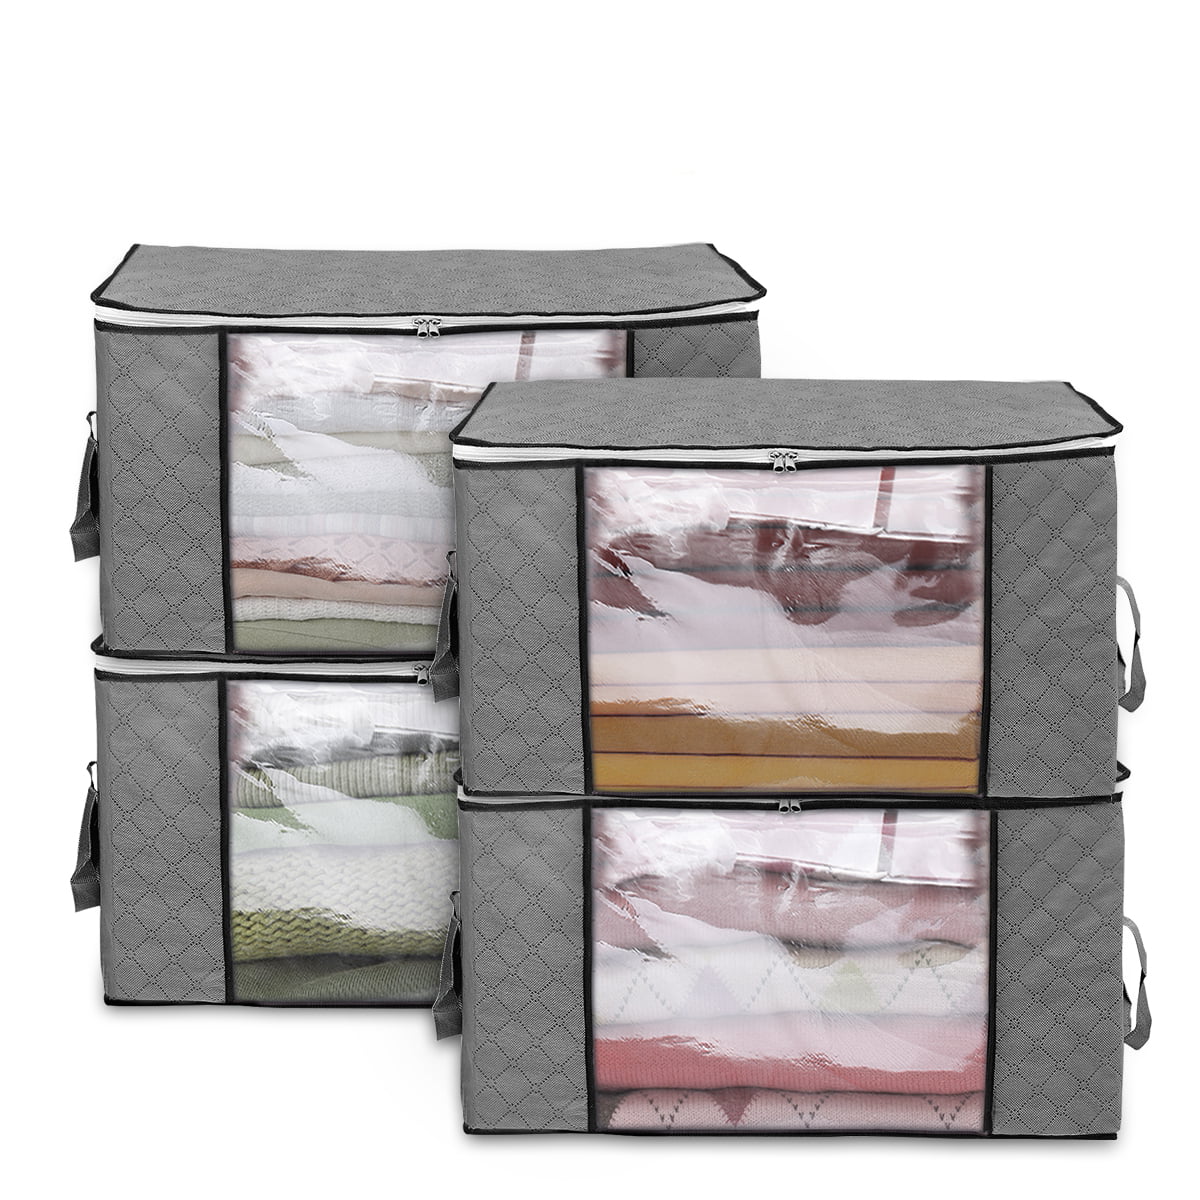 king do way Foldable Storage Bag Organizers with Zips,Carry Handles&Window,Large Capacity Clothes Storage Anti-Mold Moistureproof Closet Storage Boxes for Comforters,Blankets,Bedding,4 Pack 